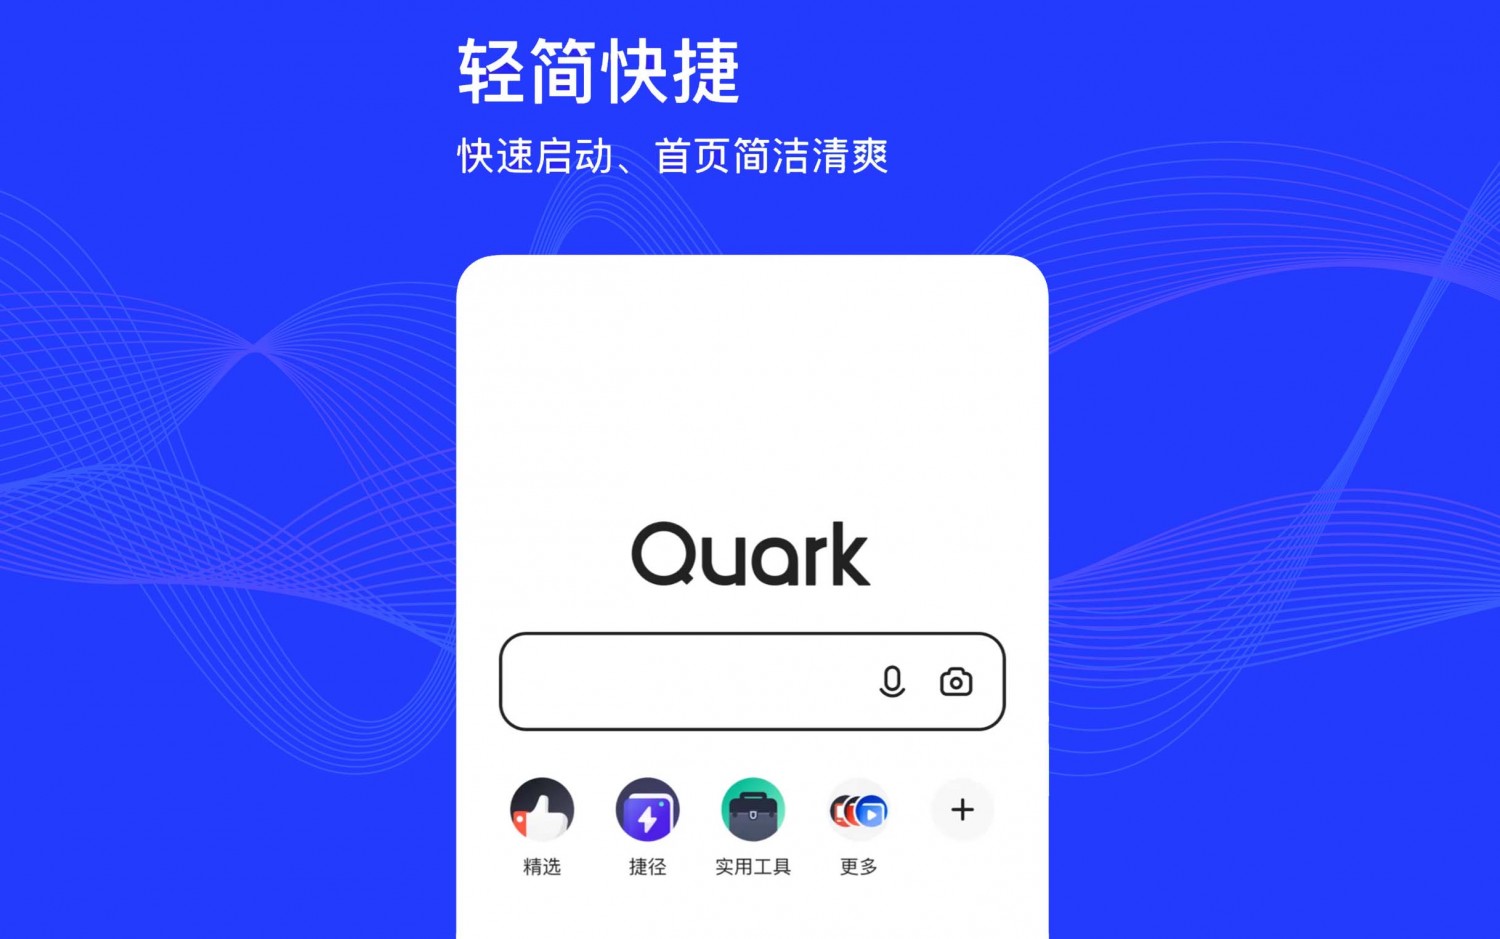 Alibaba's Quark Search Engine Fined for Harmful Content